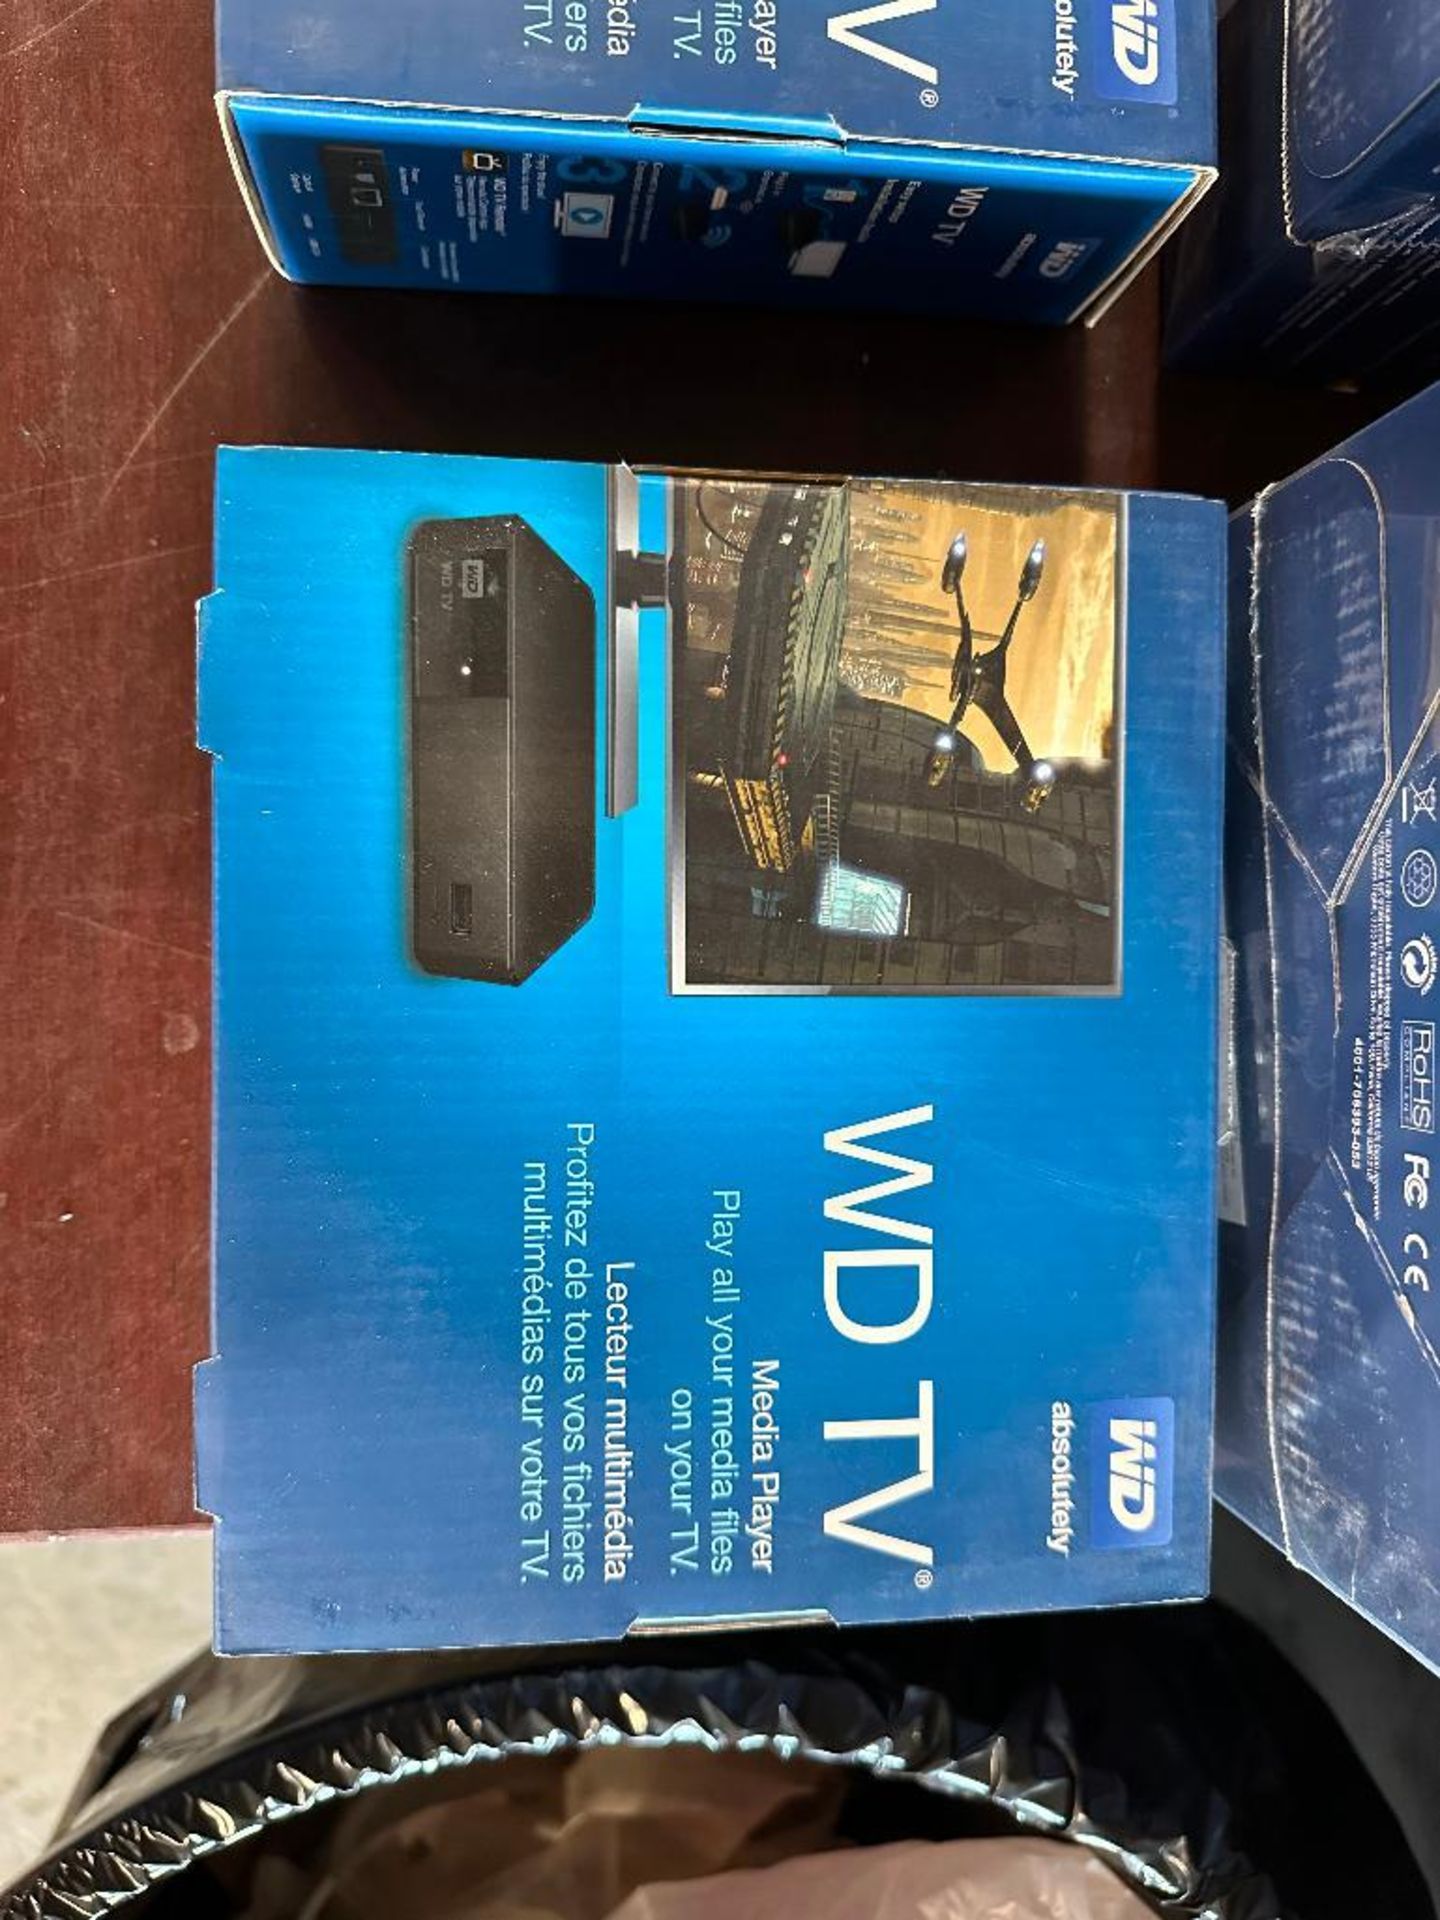 *NEW* WD MyCloud Personal Cloud Storage w/ WD TV Media Player - Image 3 of 3